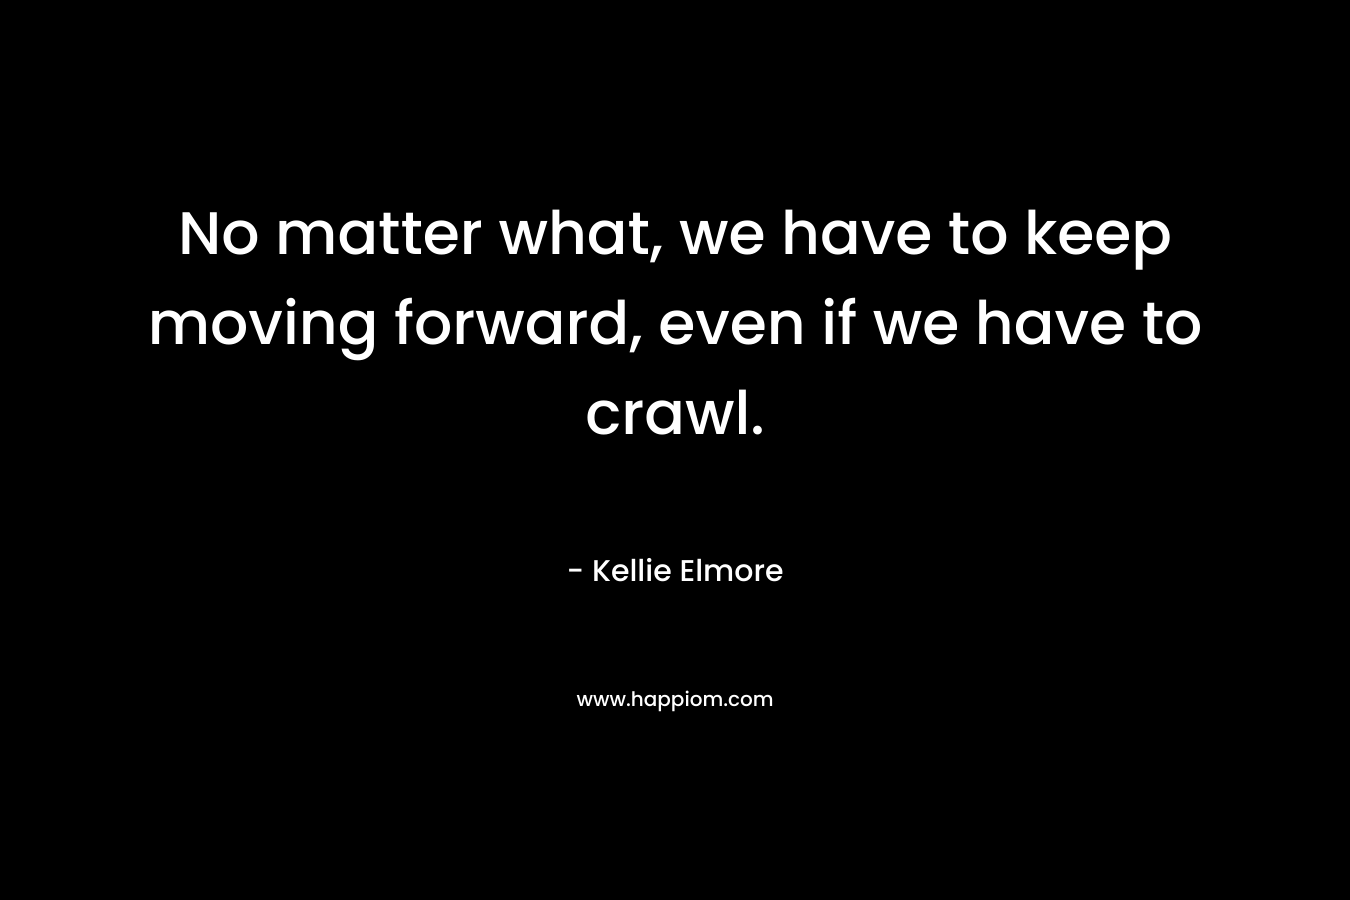 No matter what, we have to keep moving forward, even if we have to crawl.